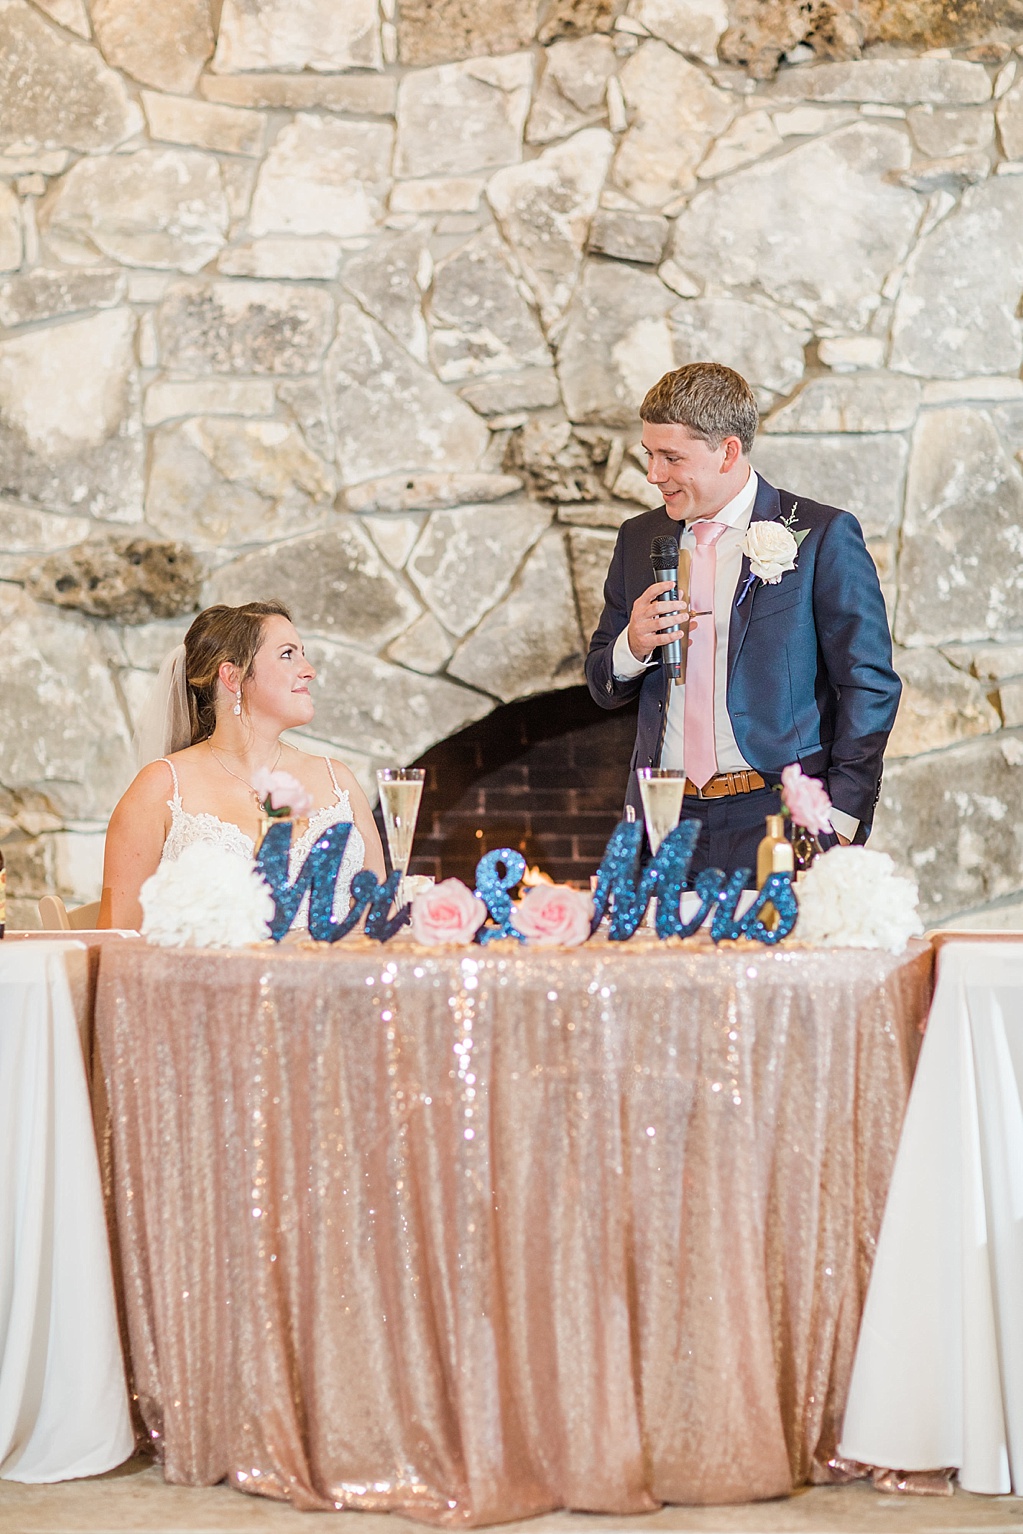 The Oaks at Boerne Wedding Photos by Allison Jeffers Photography 0127